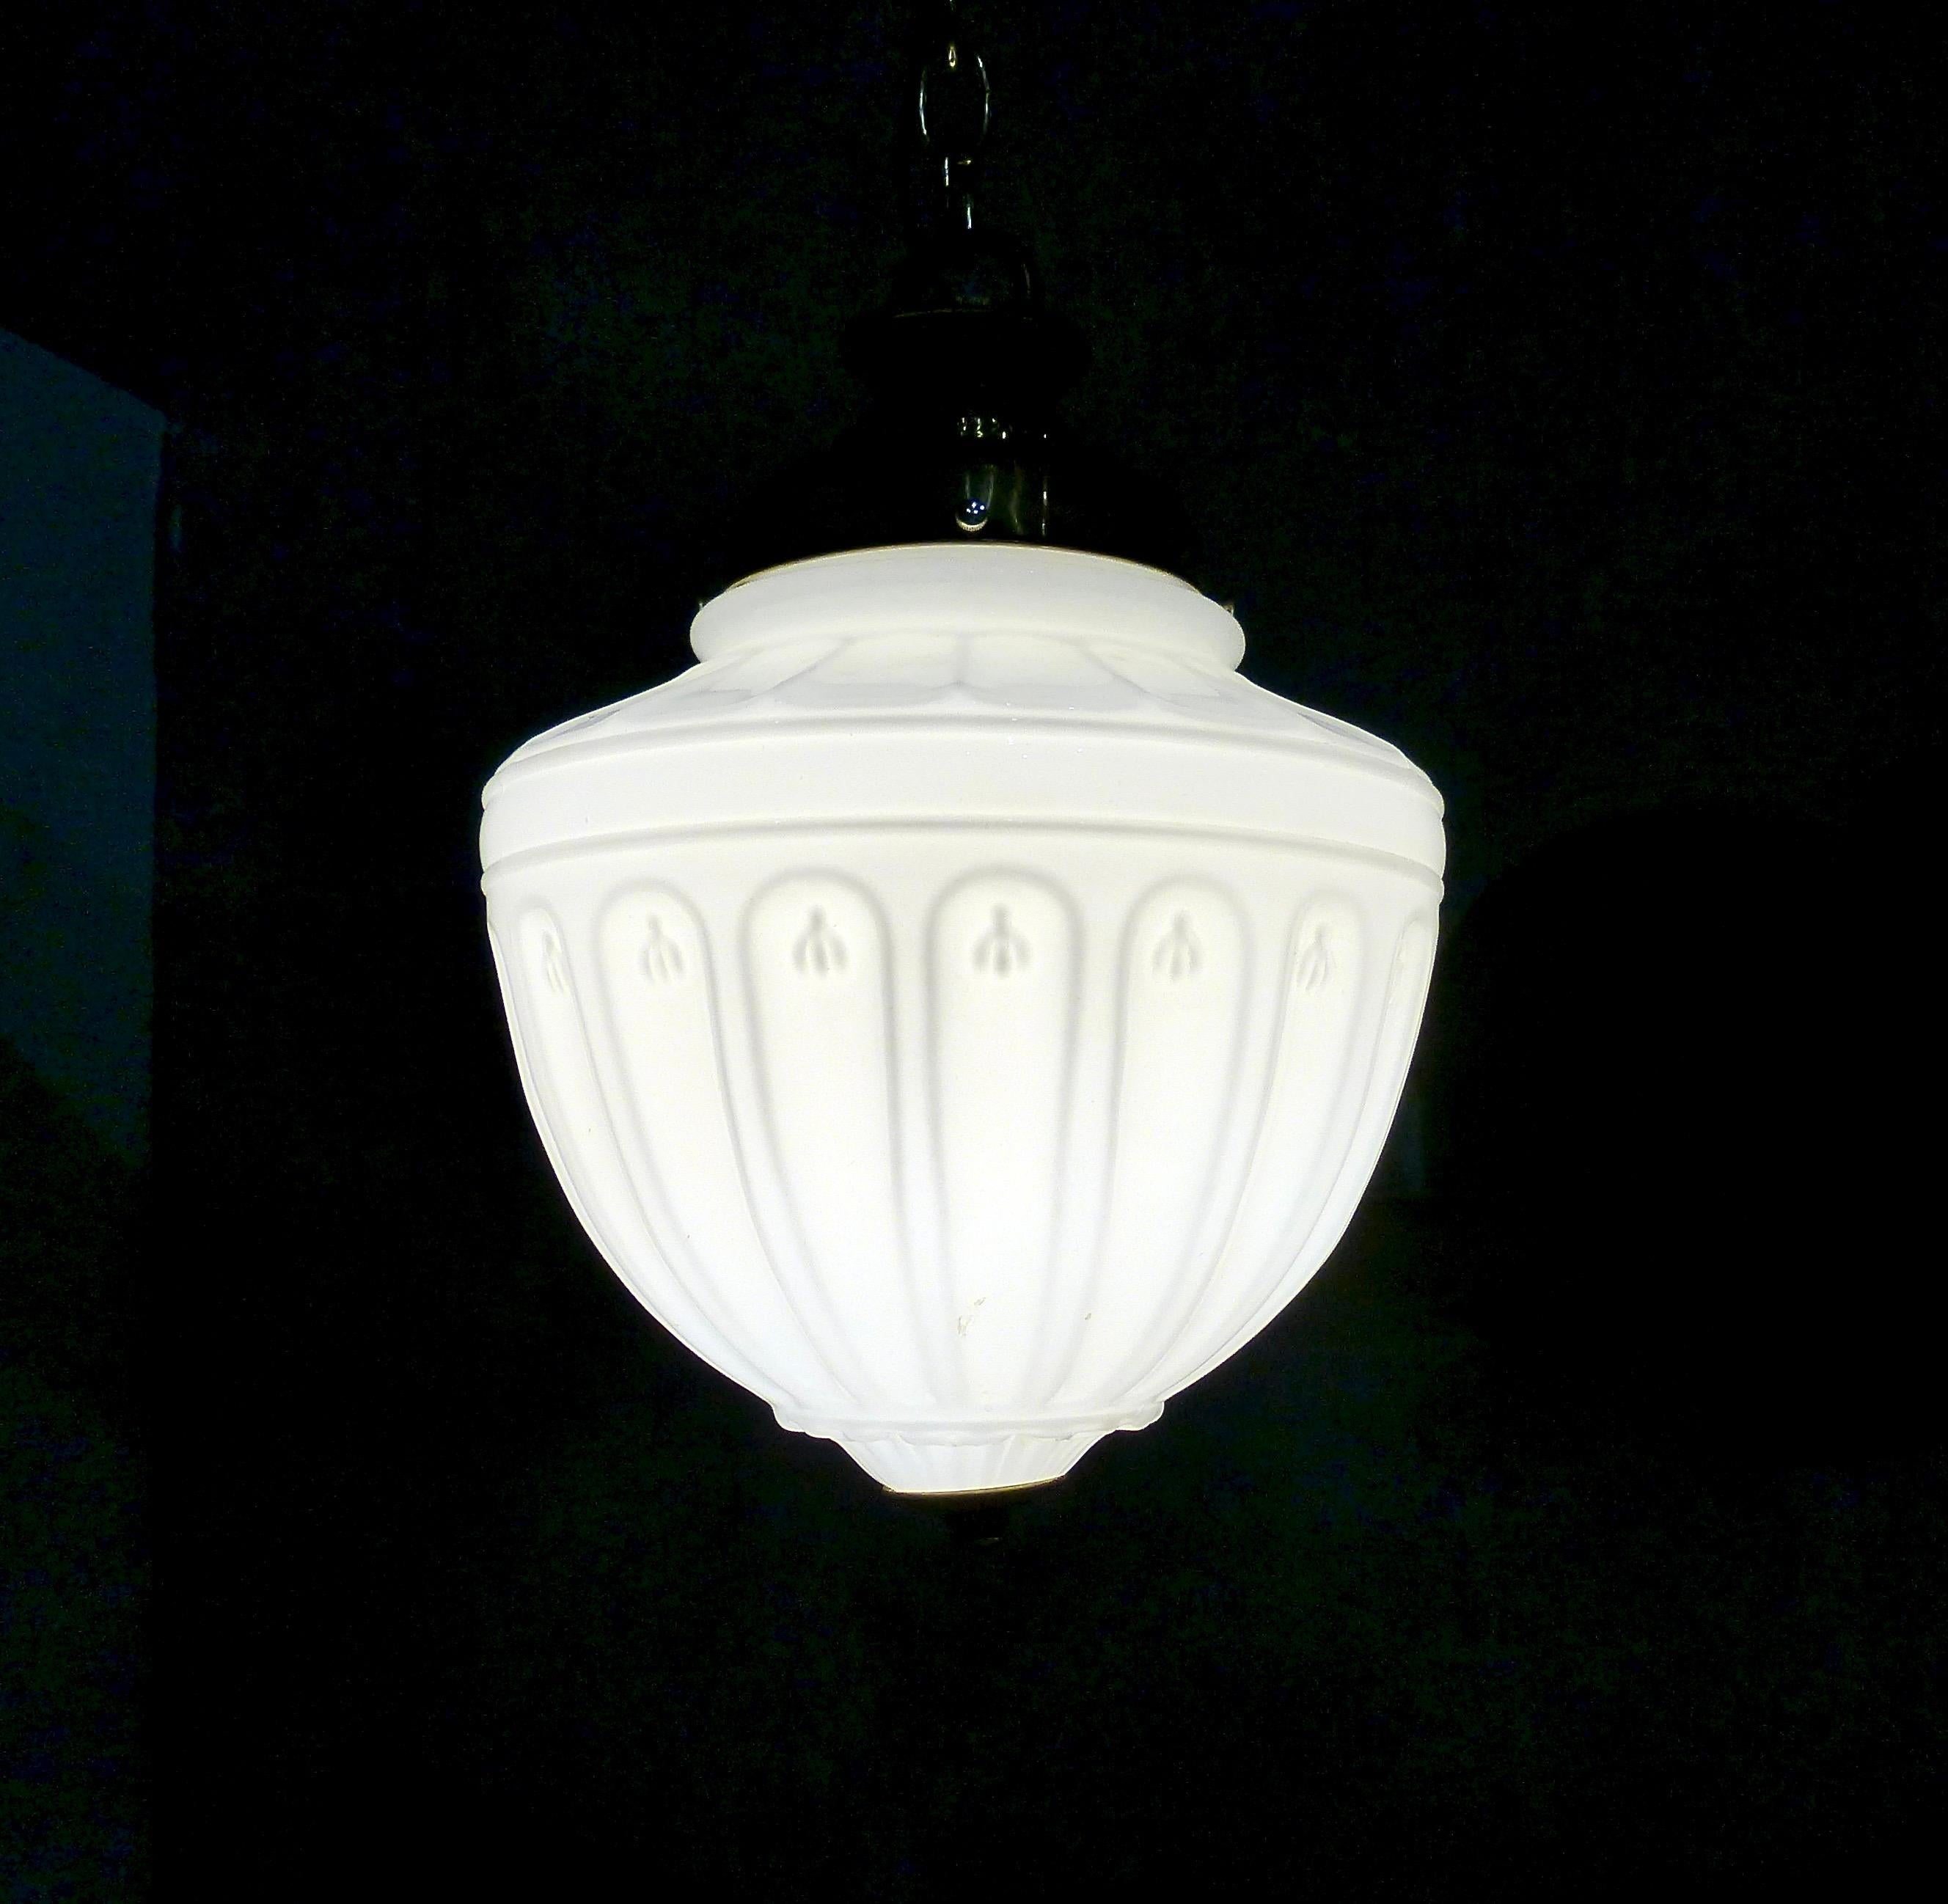 A dramatic, ribbed milk glass pendant from circa 1910. Original brass fittings. Currently hangs at 36” but could be altered to suit your application. Re-wired and CSA approved to current electrical standards; ceiling mounting plate included. Only